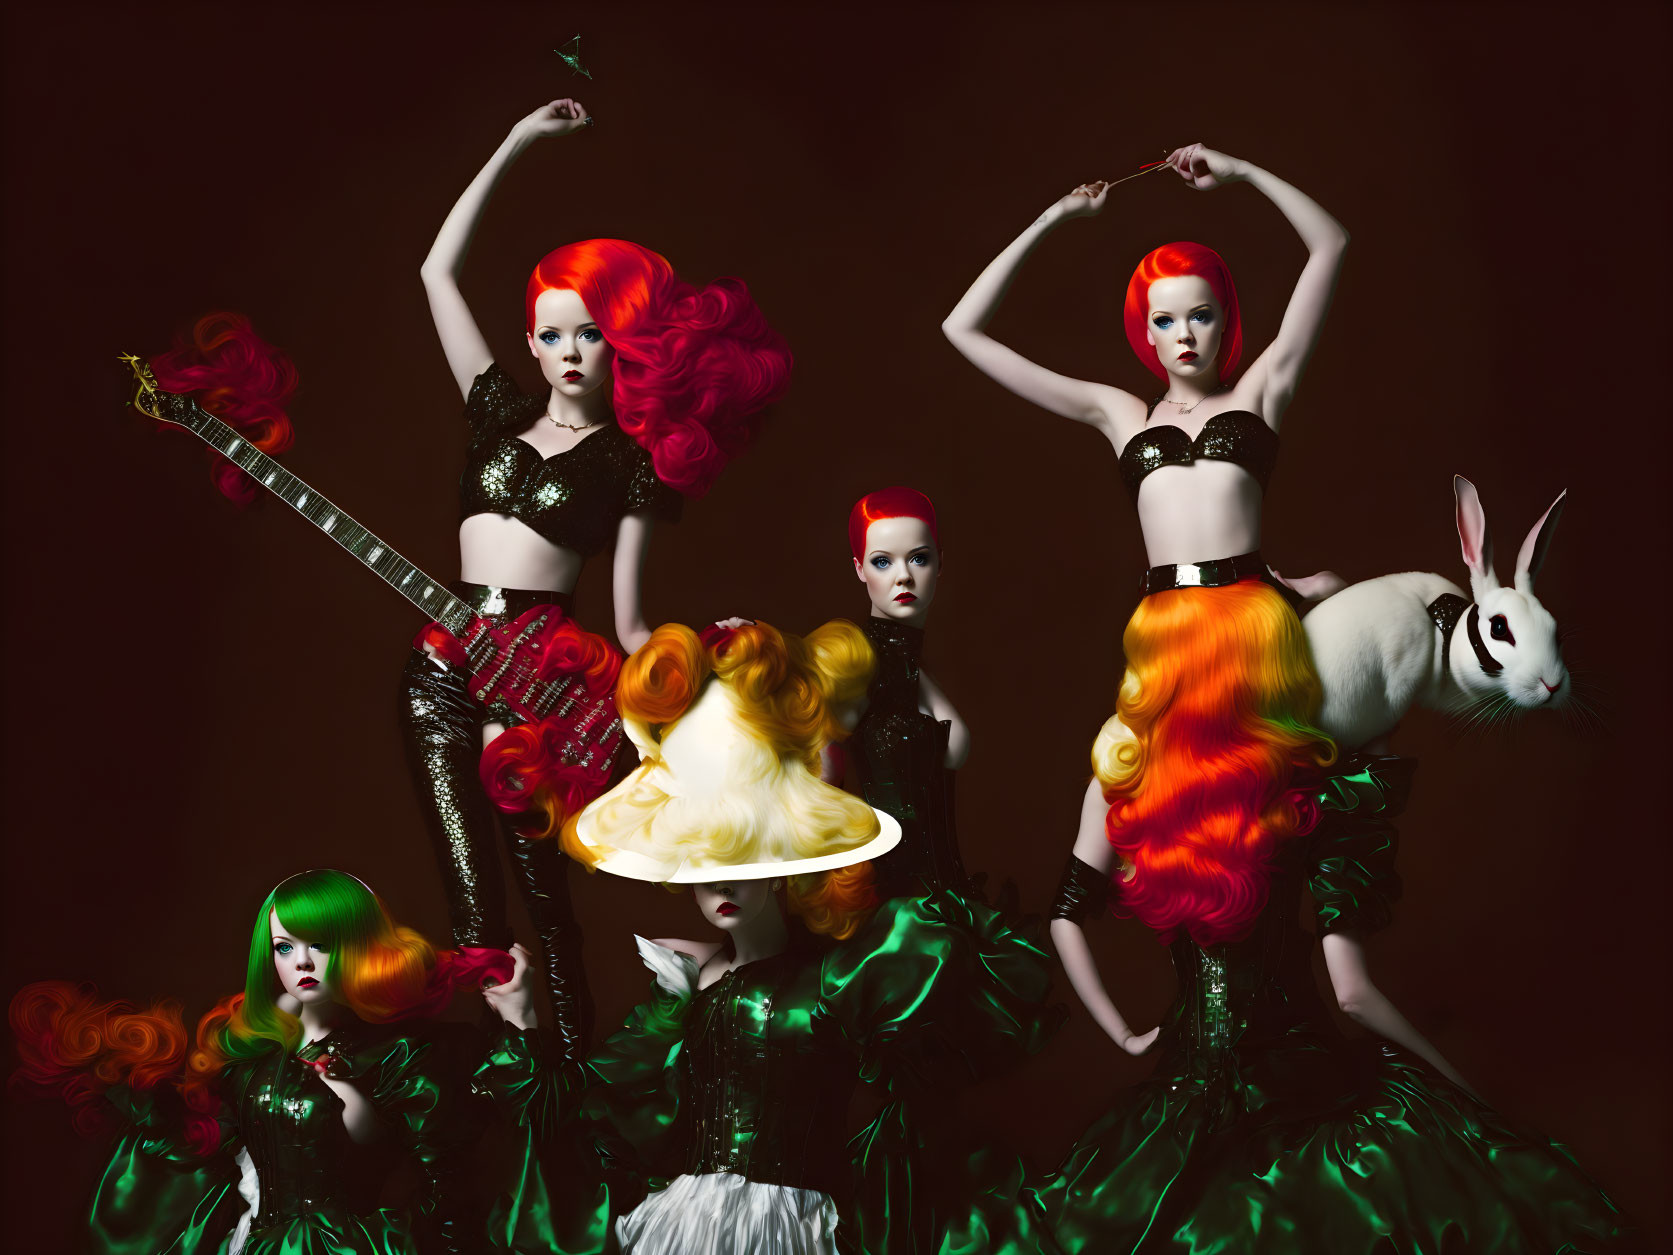 Stylized models with colorful hair and makeup posing with guitar and rabbit